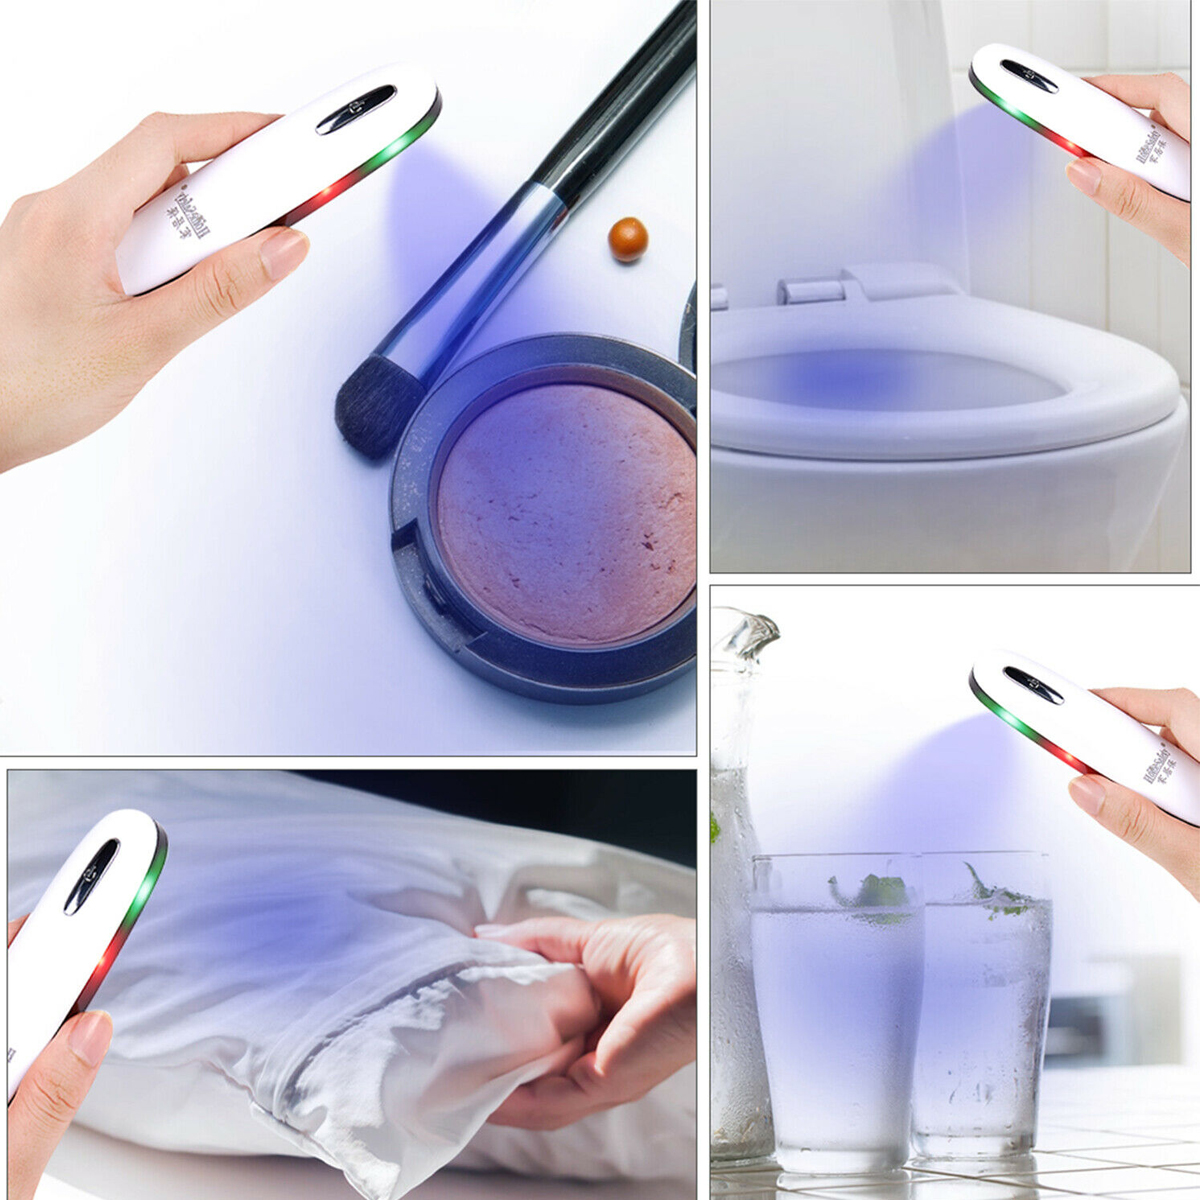 Portable-UV-Sterilizer-Lamp-LED-Electric-Ultraviolet-Disinfector-Light-For-Computer-Phone-Cosmetic-C-1651050-5